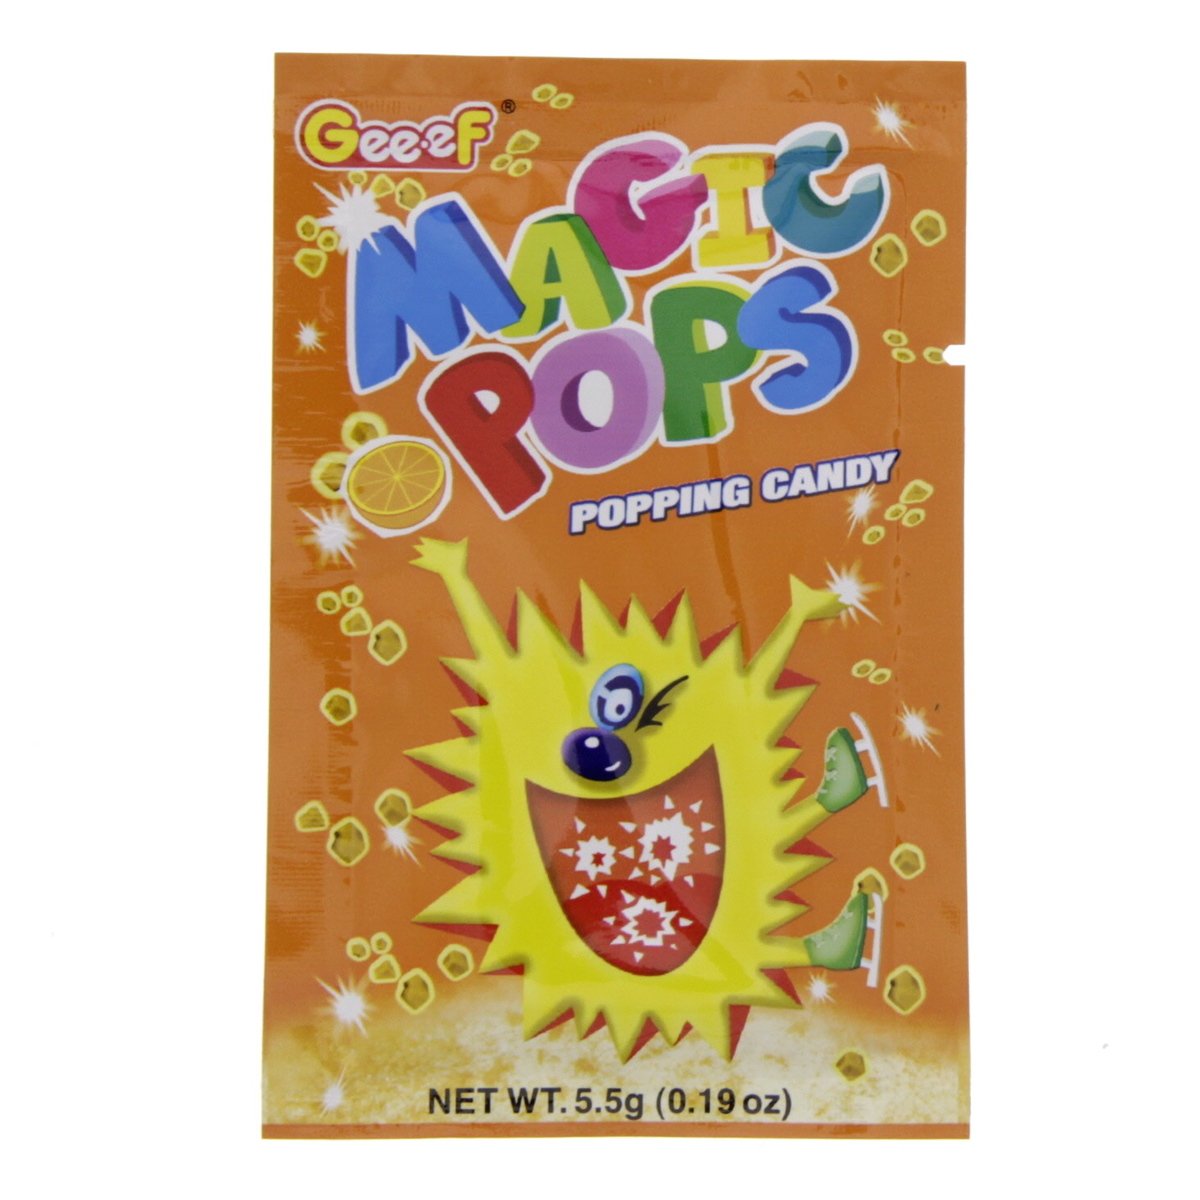 Geeef Magic Pops Popping Candy 5.5 g